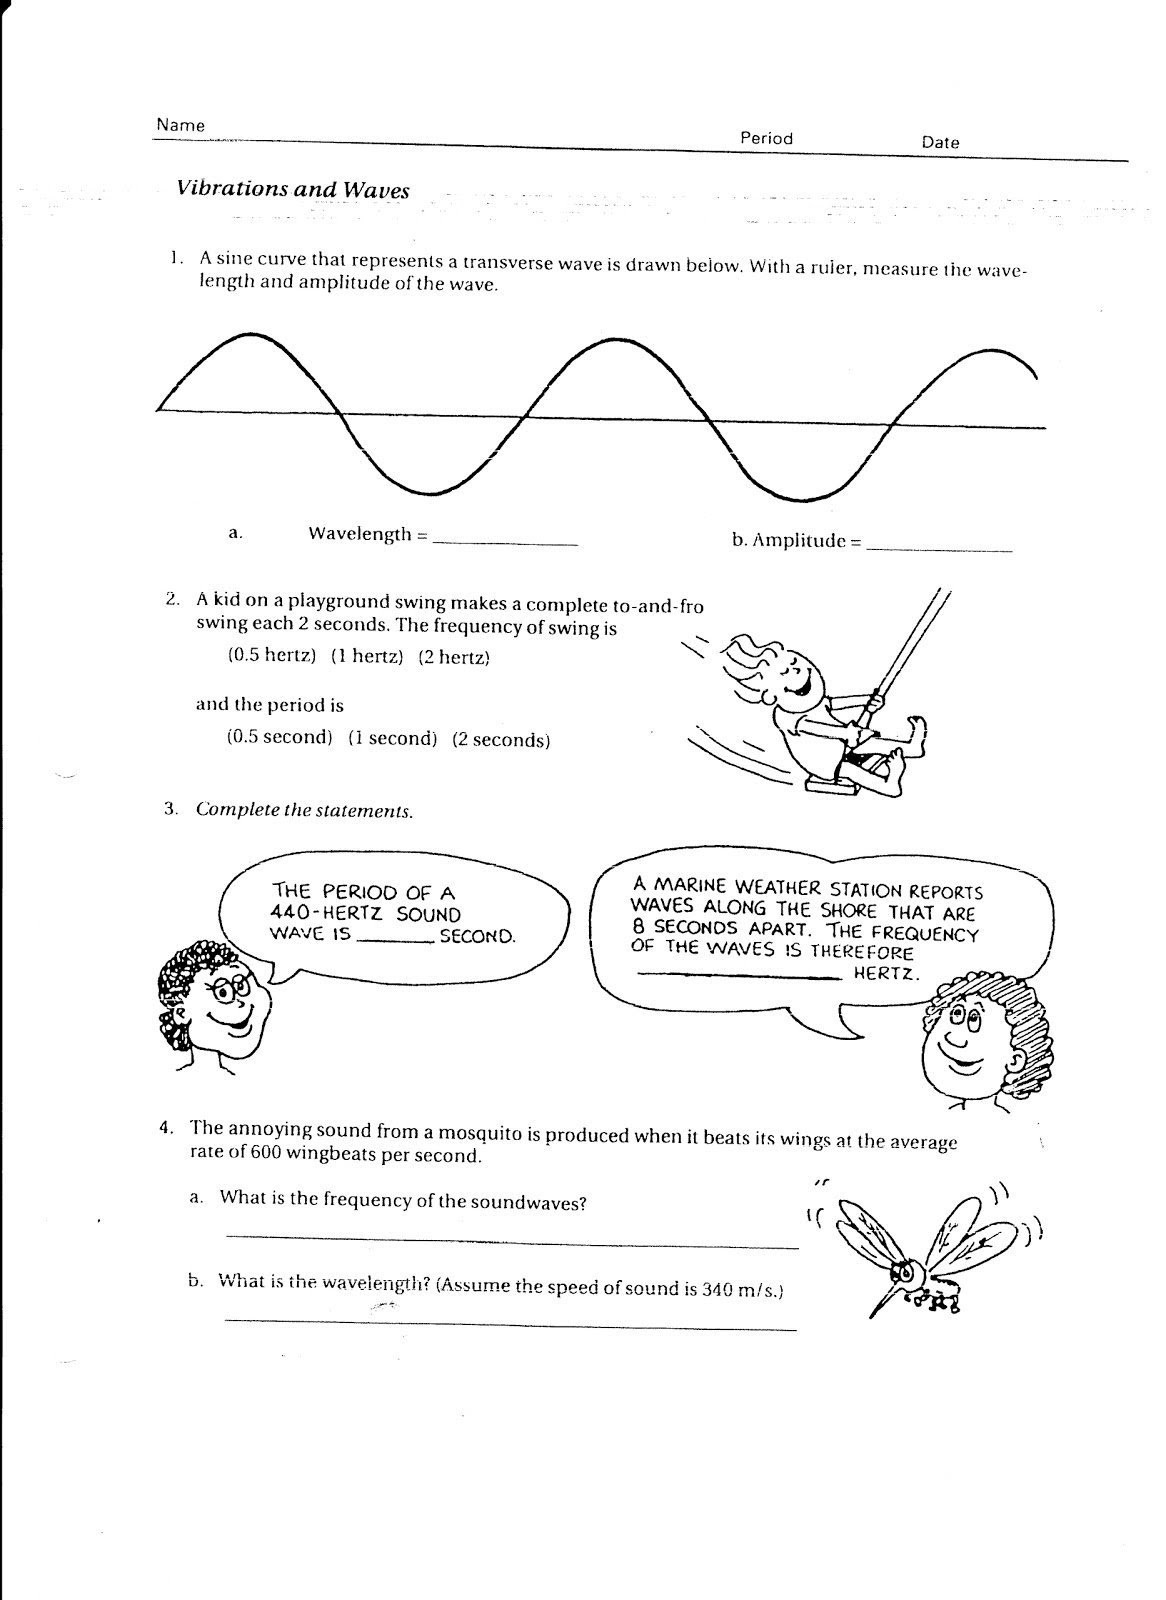 Waves Worksheet Answer Key Waves sound and Light Answer Key Philips Blue Icicle Lights